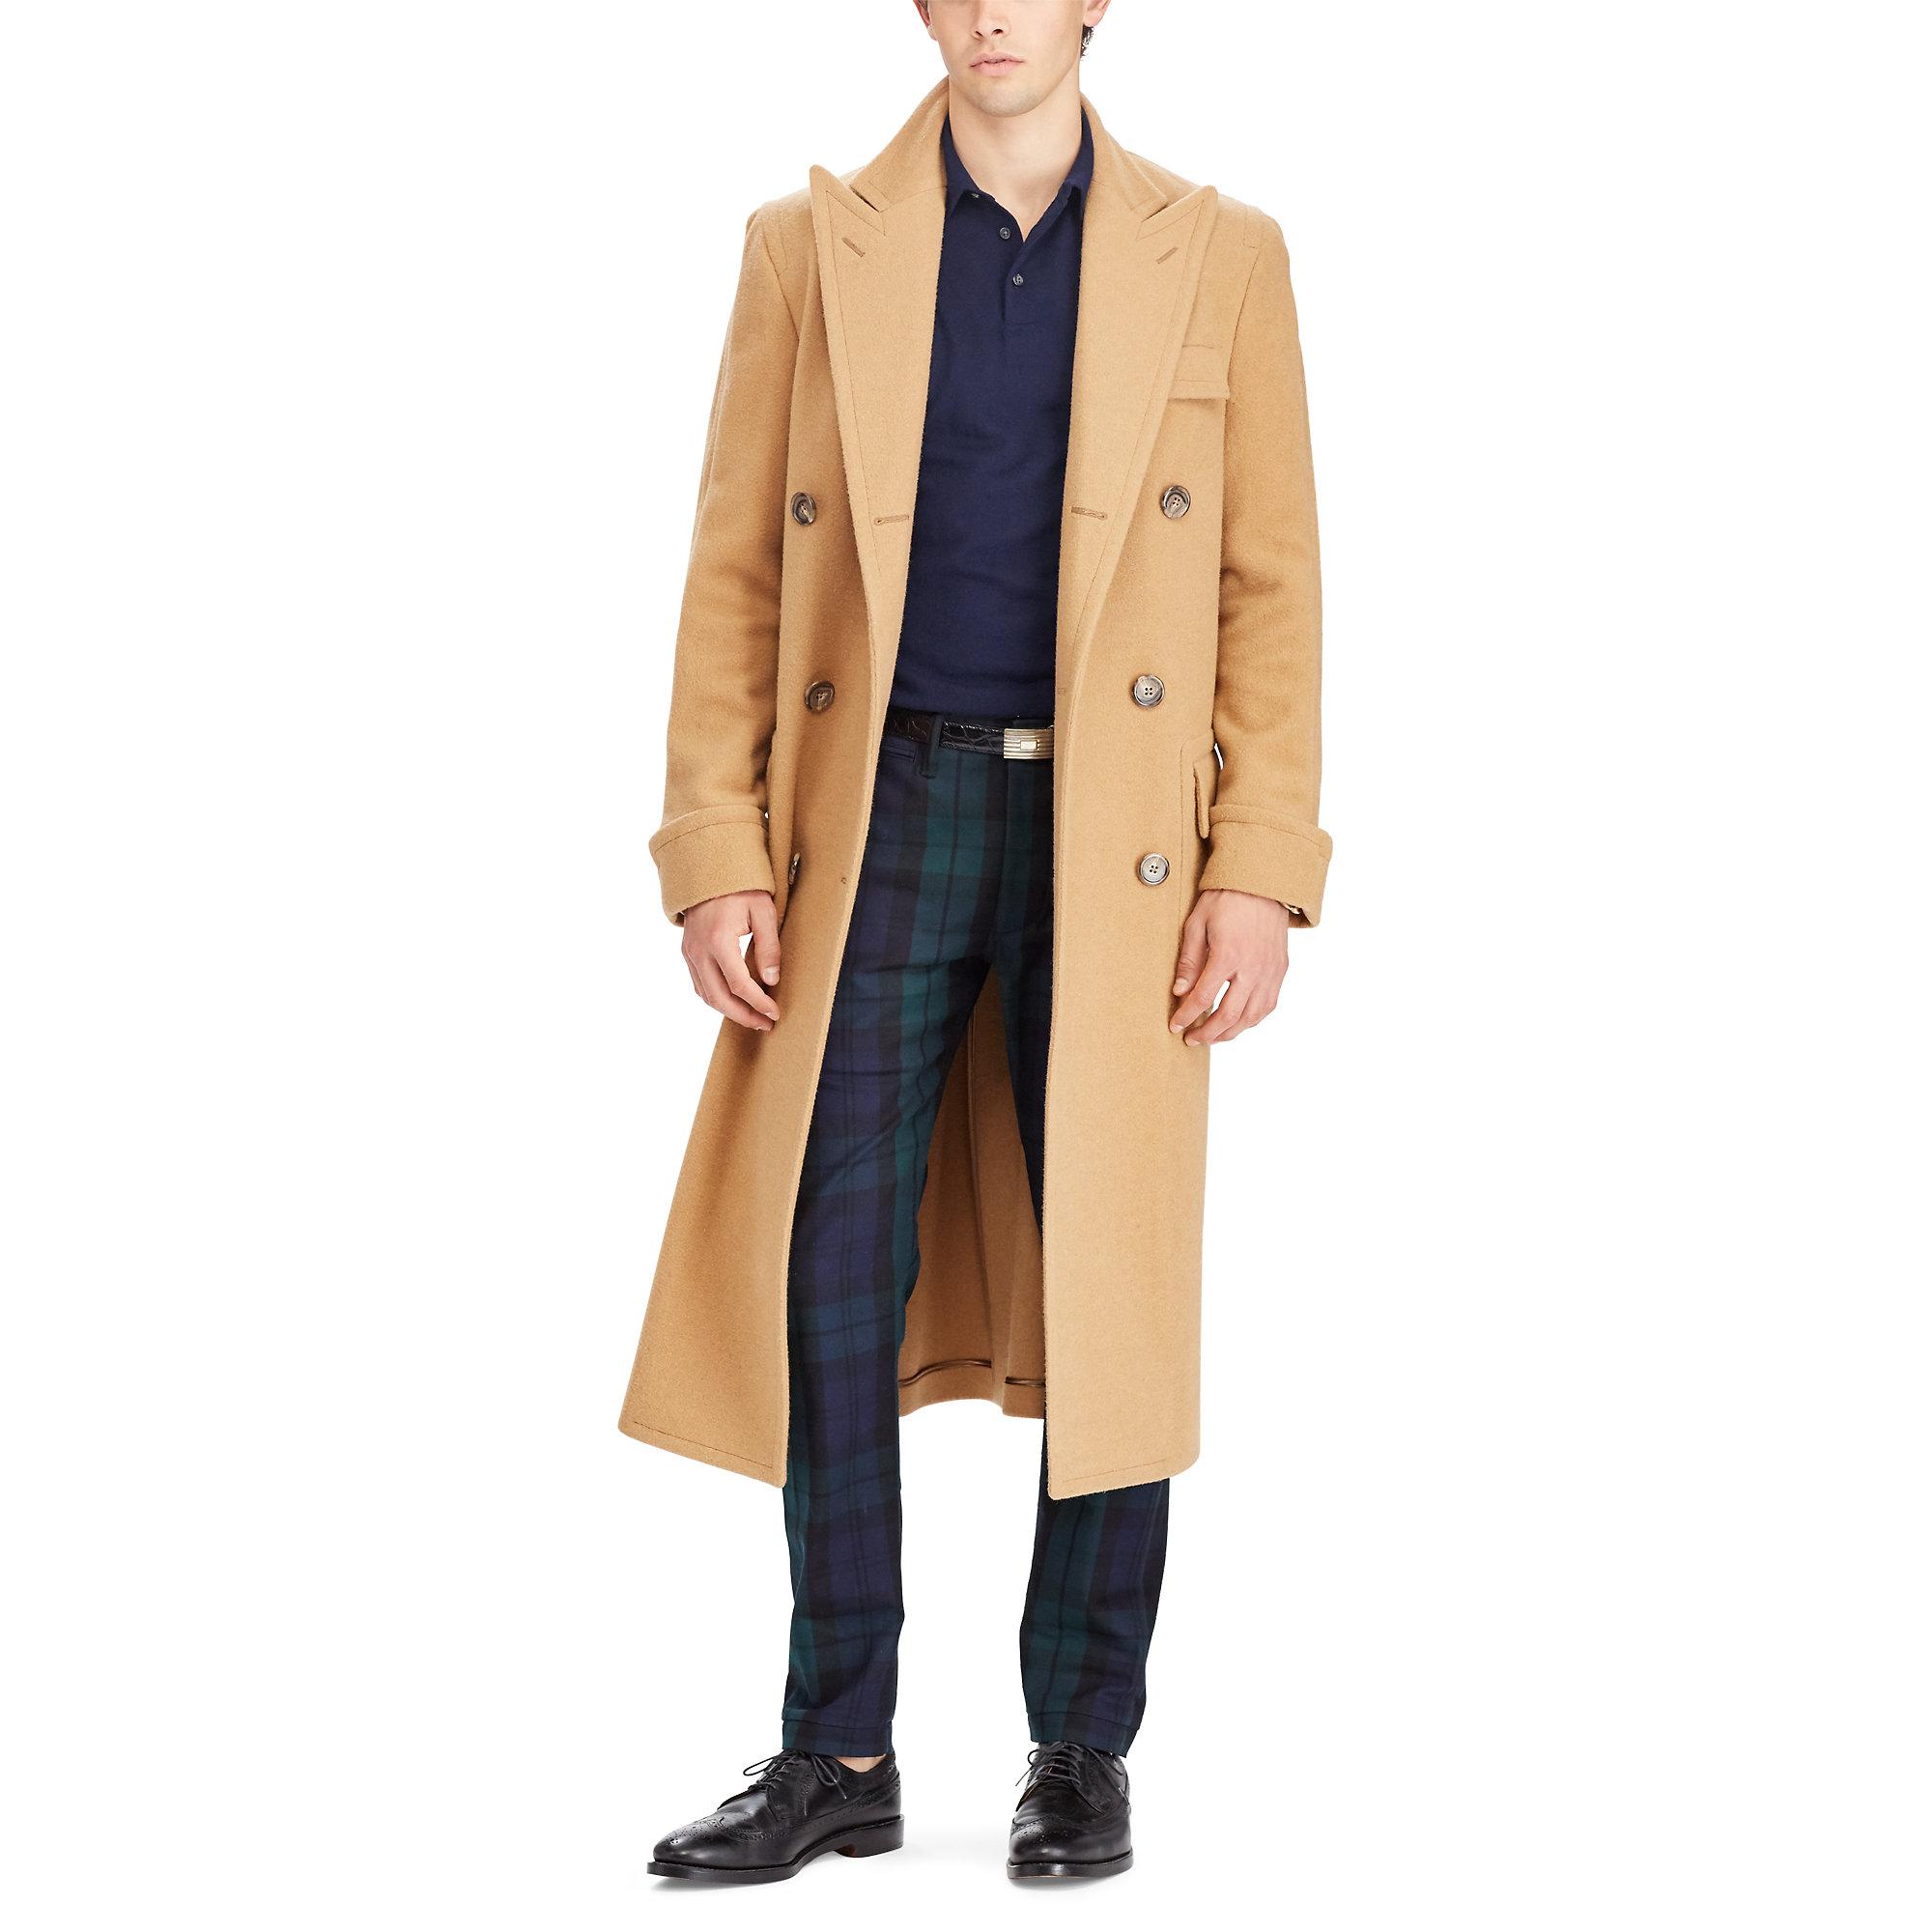 Lyst - Polo Ralph Lauren Polo Camel Hair Topcoat in Natural for Men